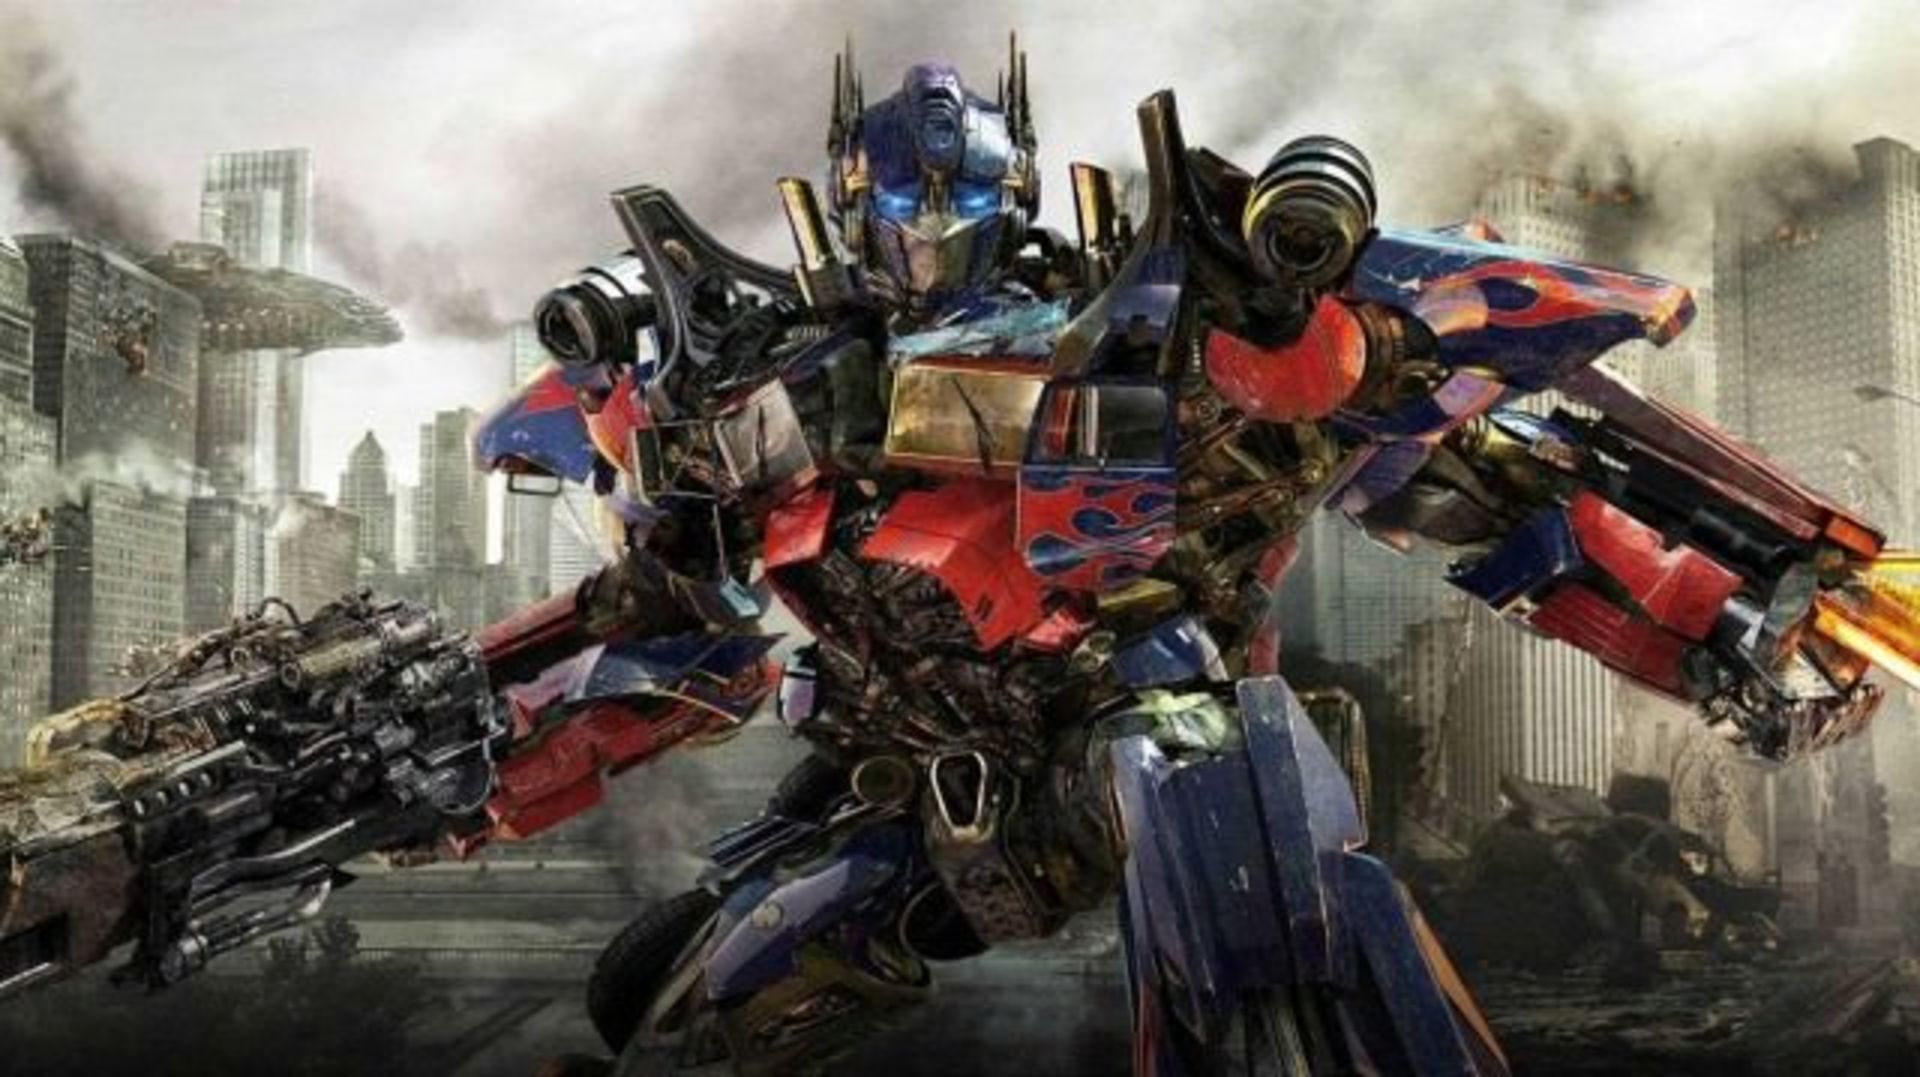 20140625225454Qwizards - Transformers Summer Edition 2014-640x359